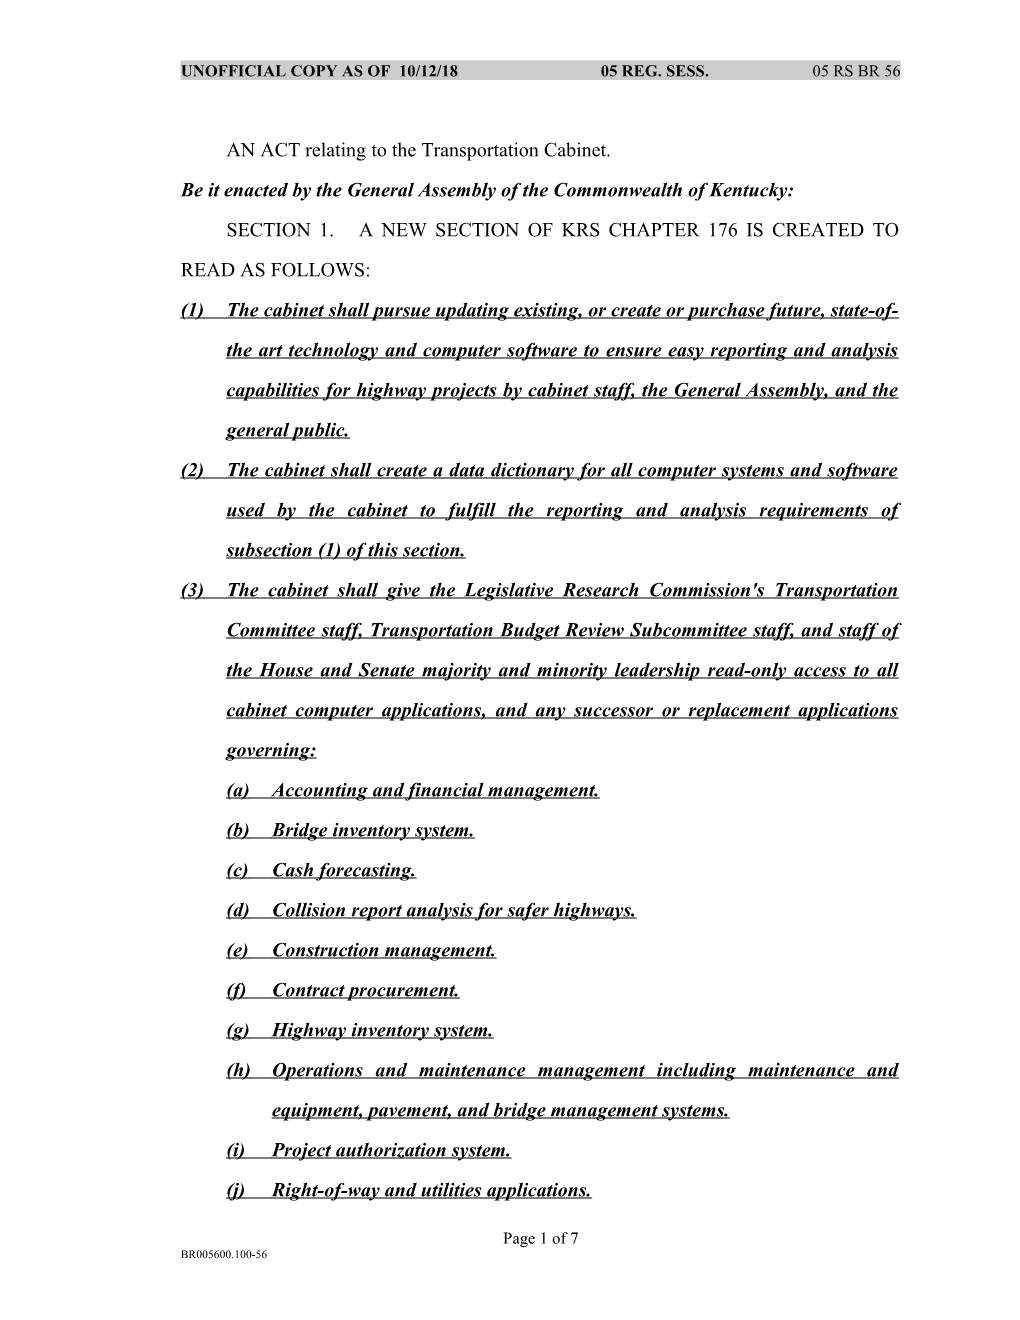 AN ACT Relating to the Transportation Cabinet